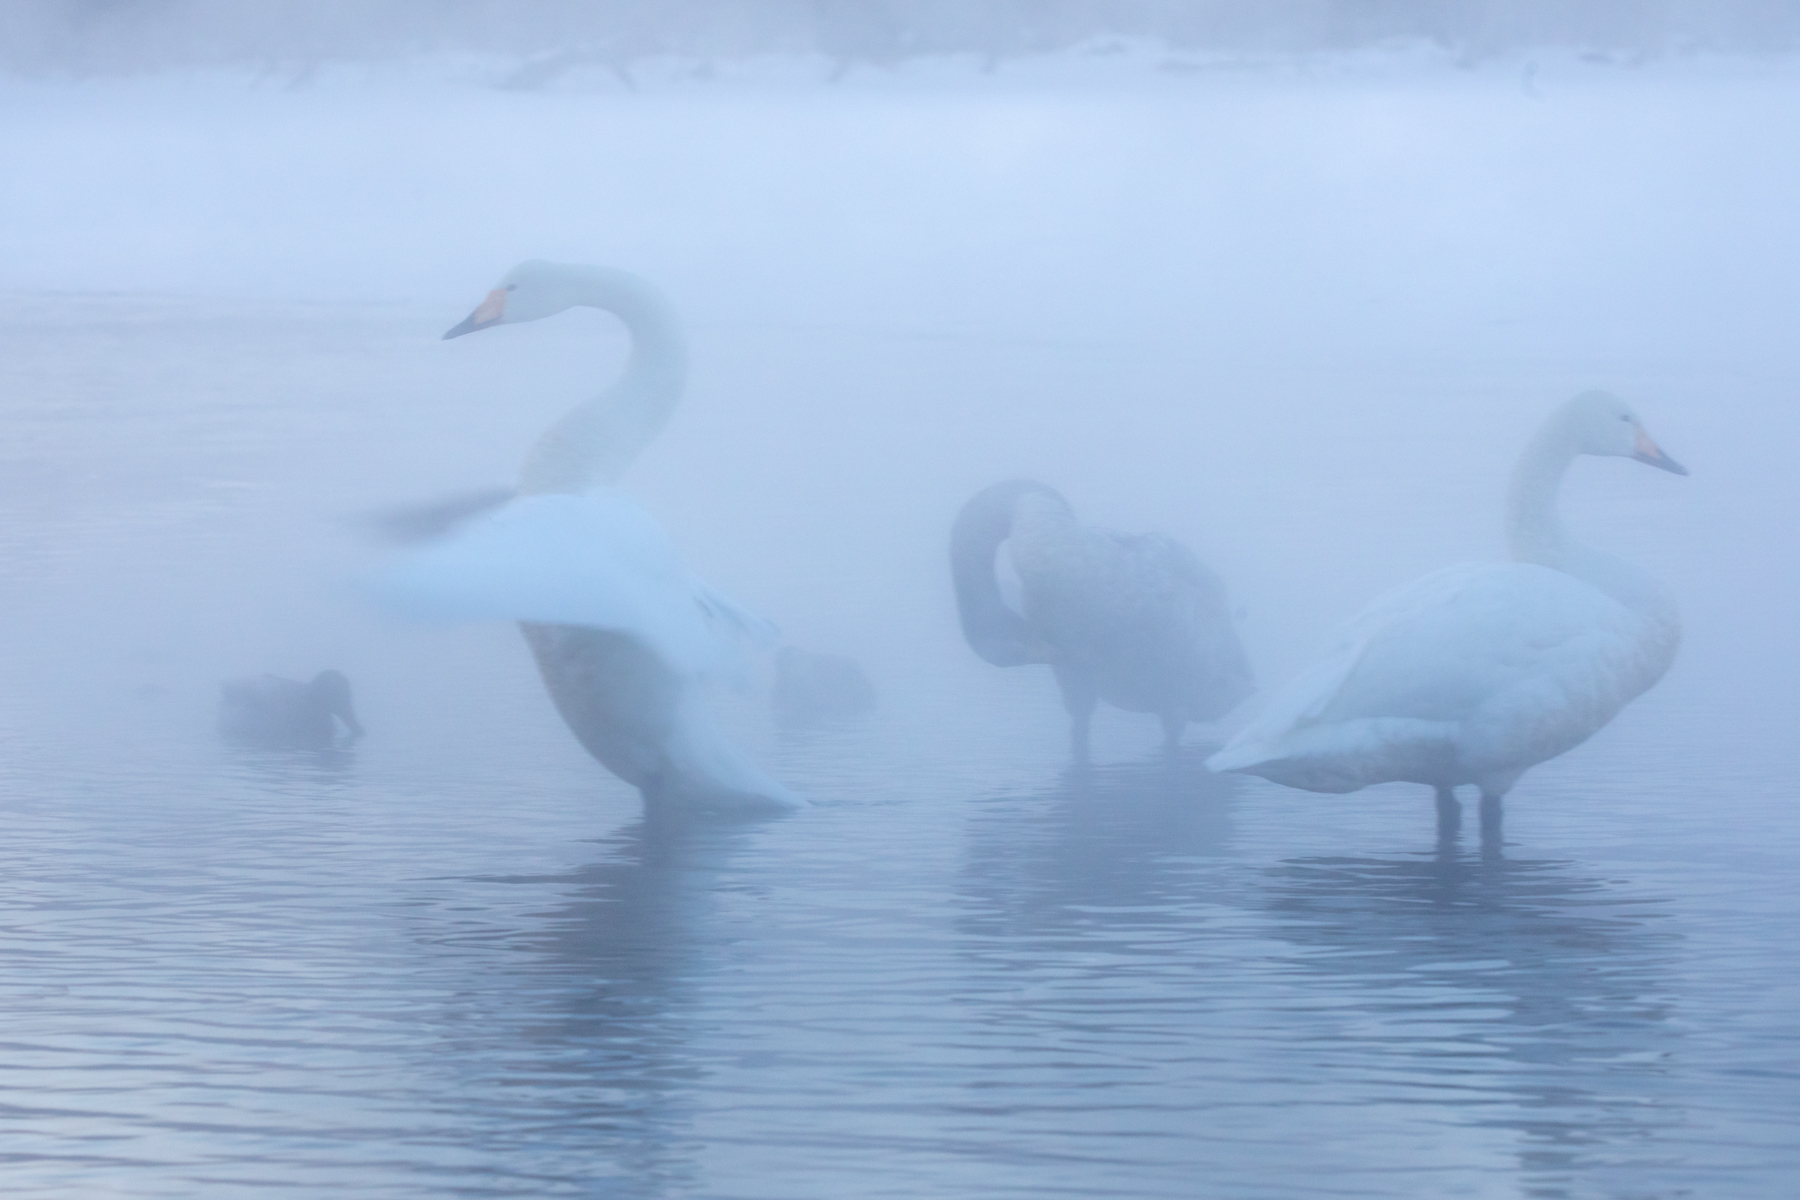 Whooper Swans in the mist (image by Mark Beaman)